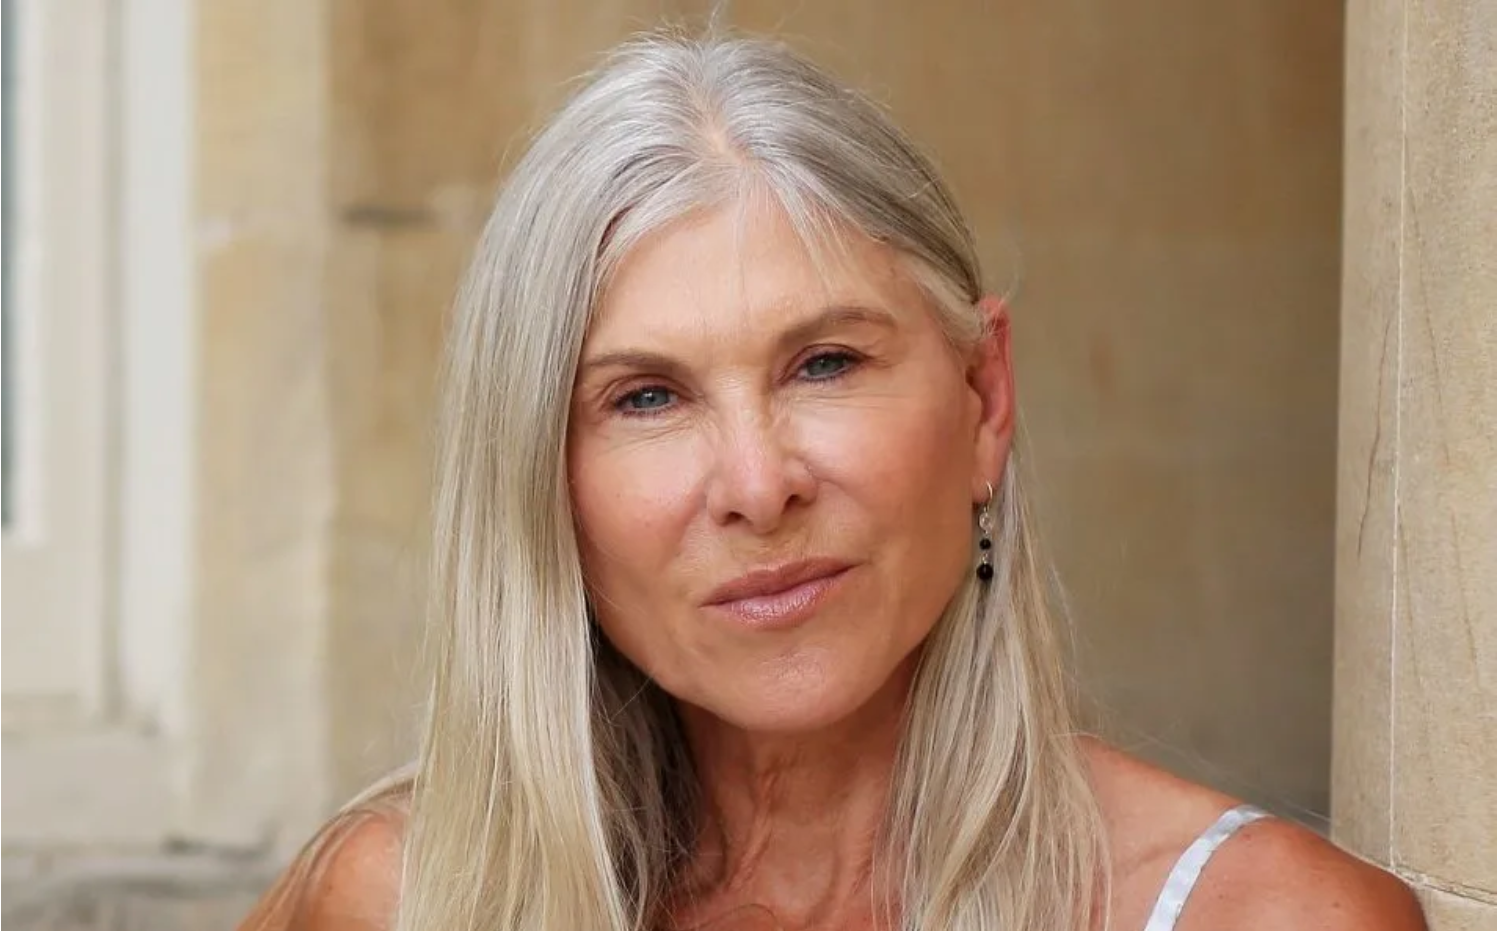 Sharron Davies, who has won numerous major titles and medals, has been called a racist by trolls, which she finds 'hilarious because I have got mixed-race kids' - Clara Molden for The Telegraph